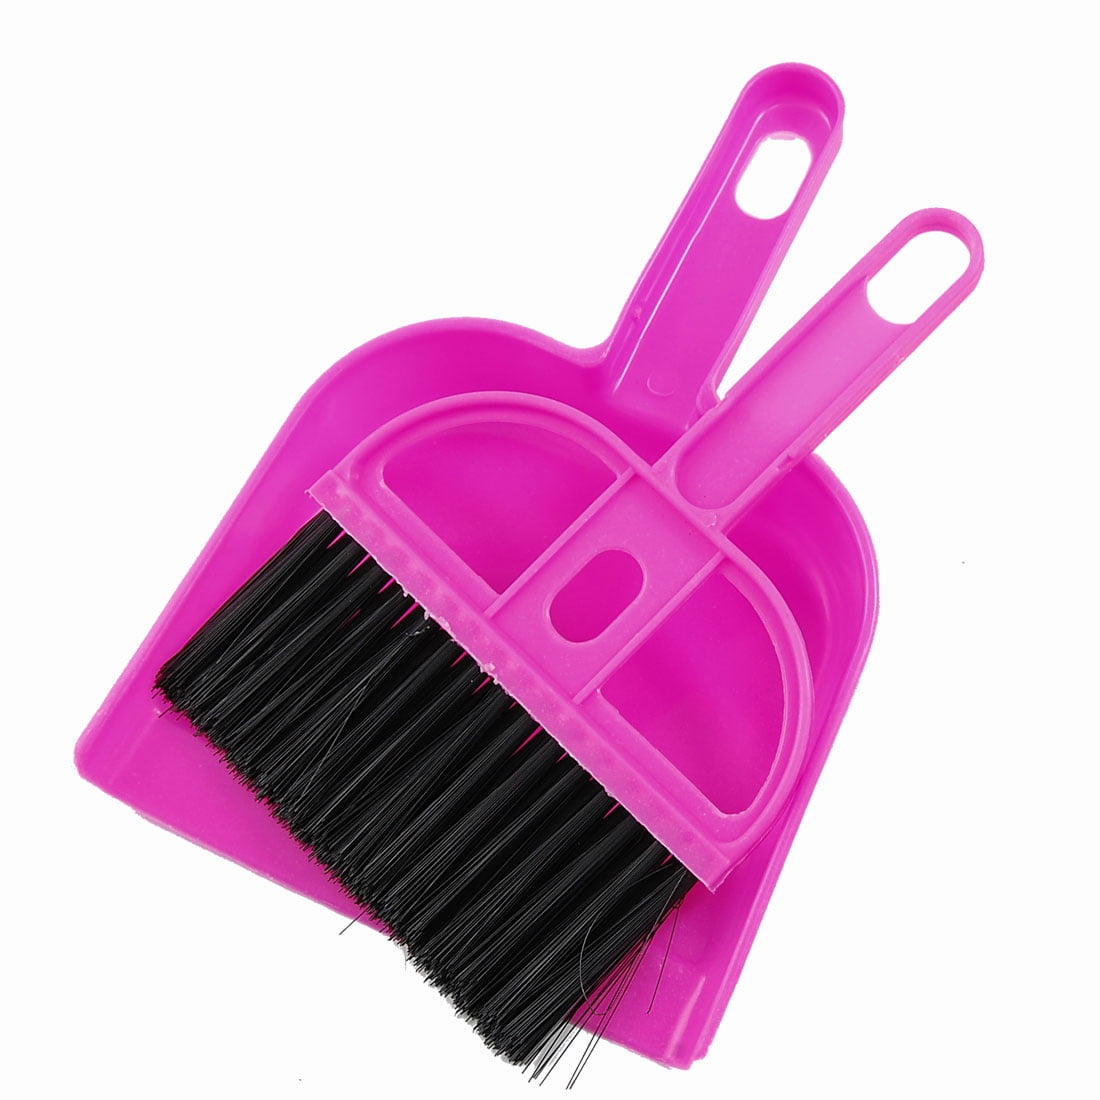 pink broom and dustpan